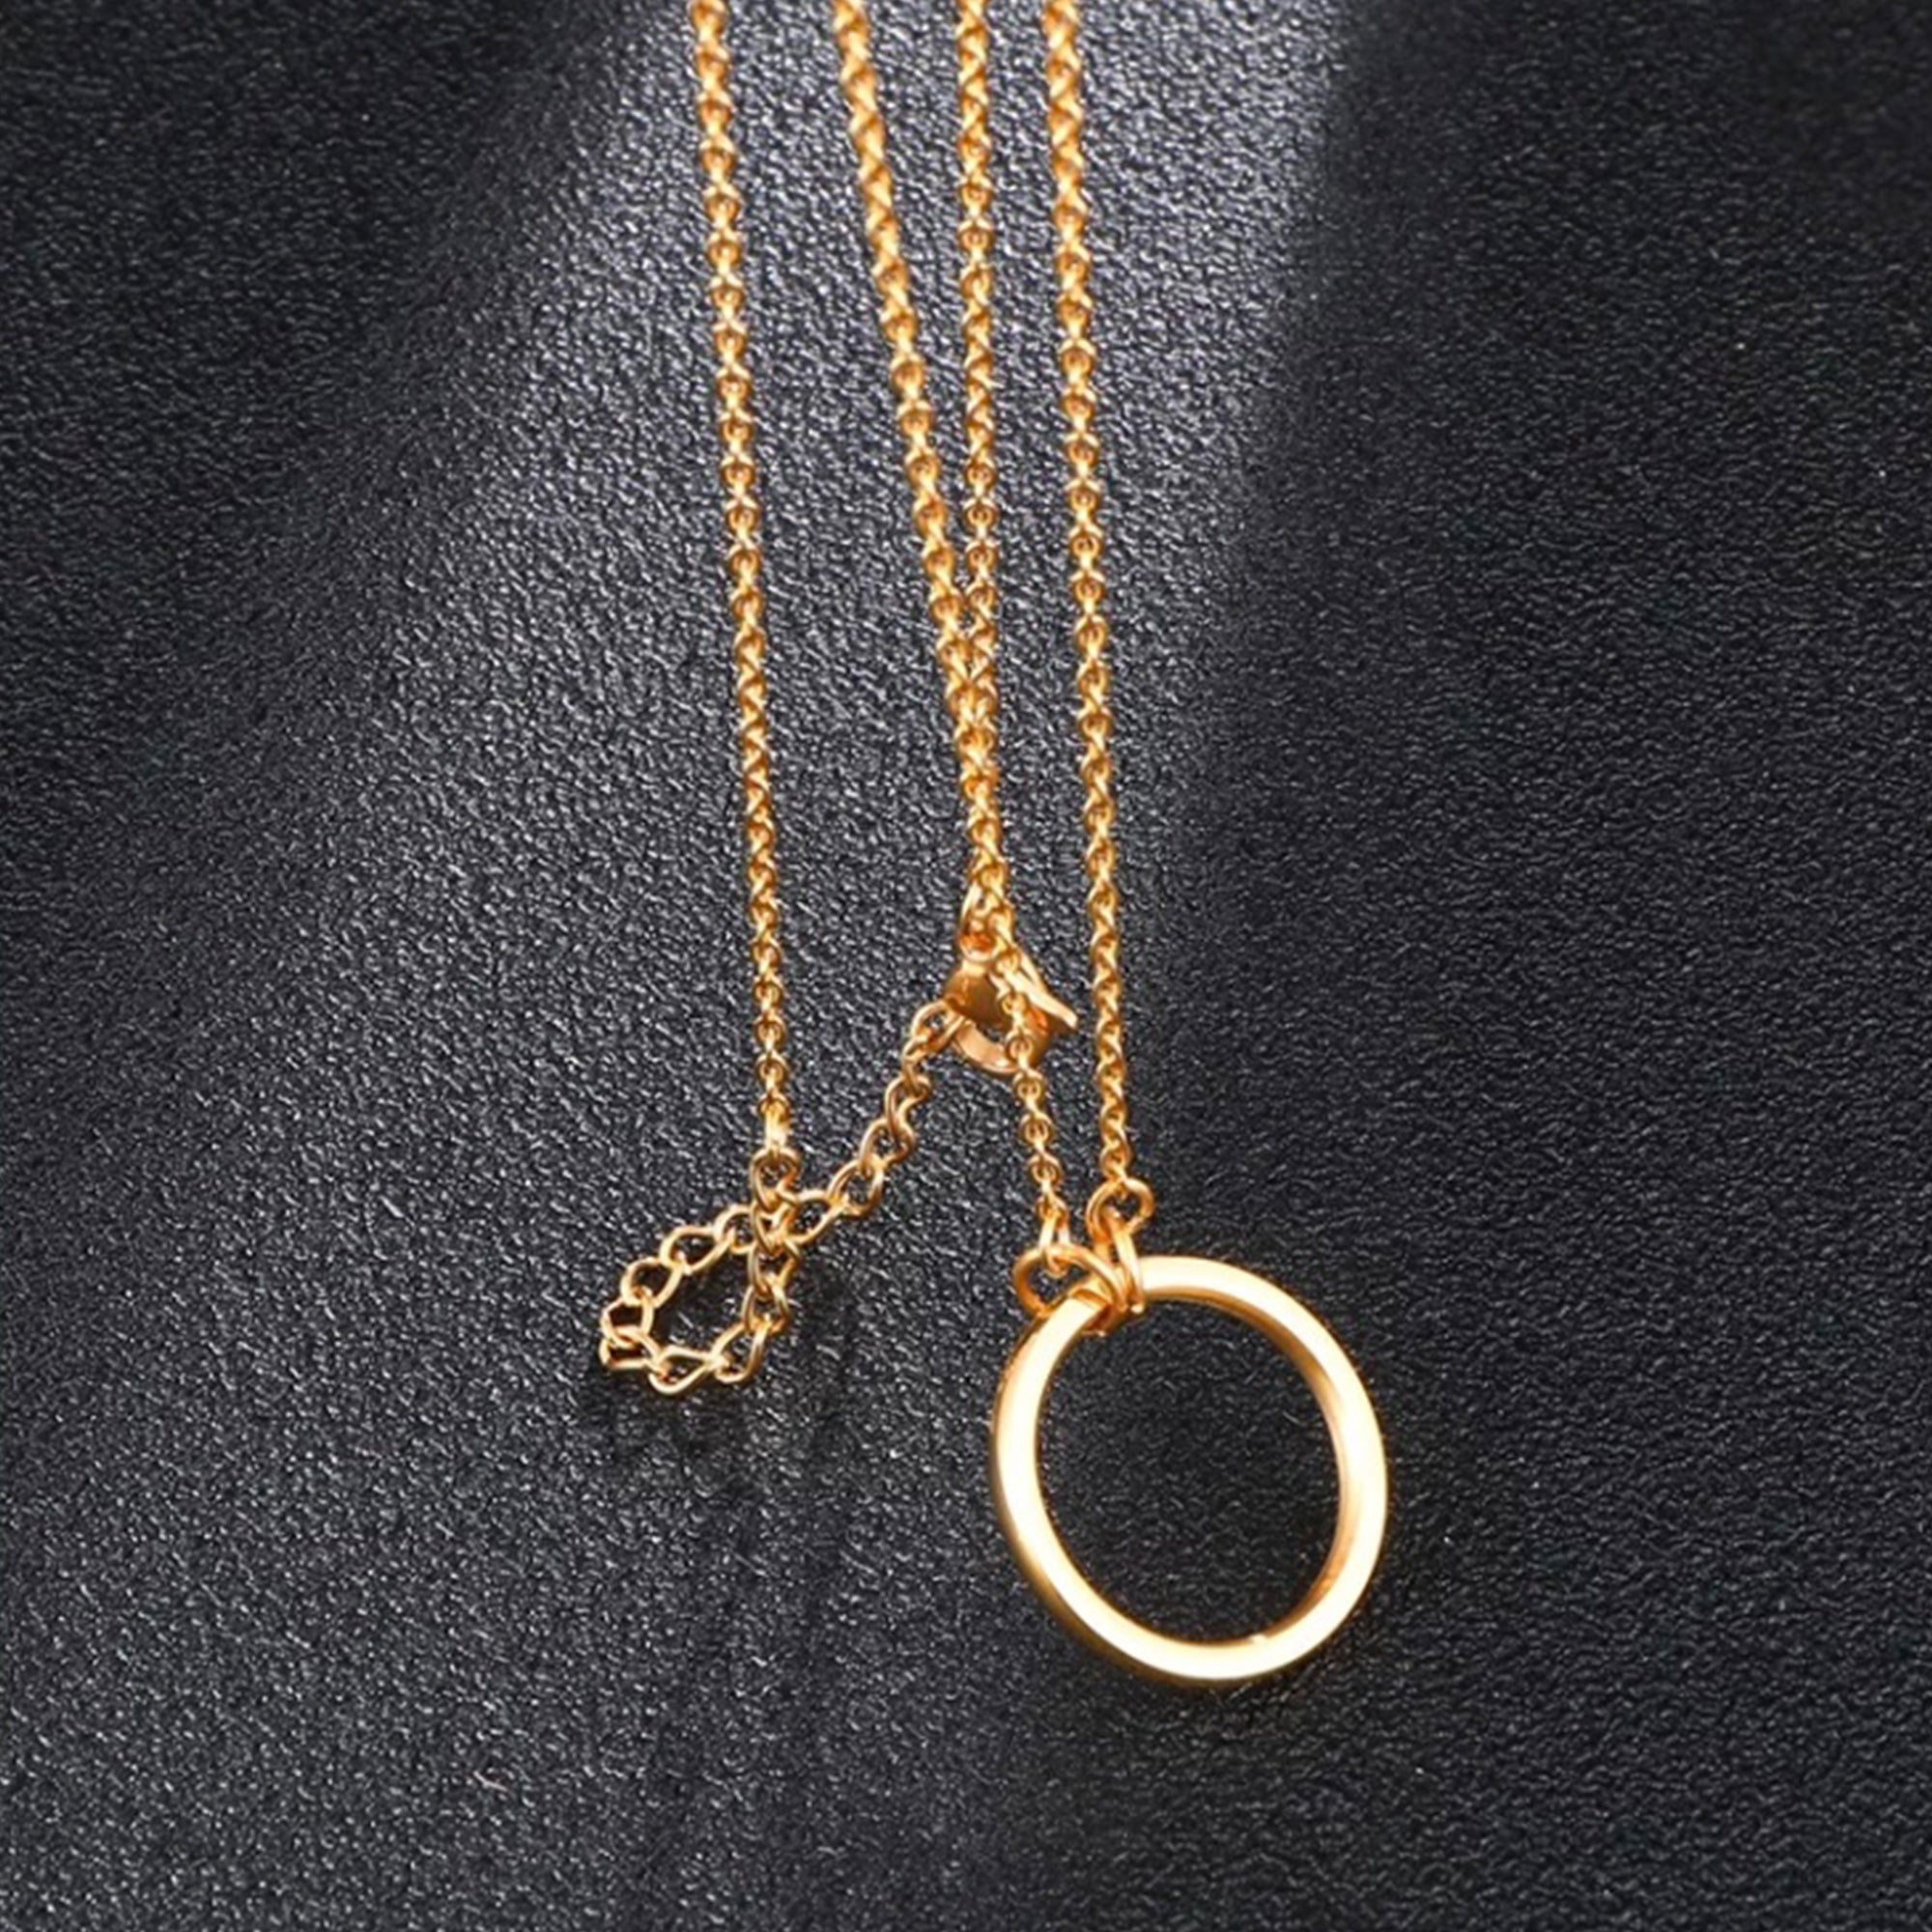 Gold And Silver Infinity Double Circles Necklace For Girls Interlocking  Circle Pendant Necklace Gold Fashionable Christmas Gift MIN From Gonggu,  $4.5 | DHgate.Com